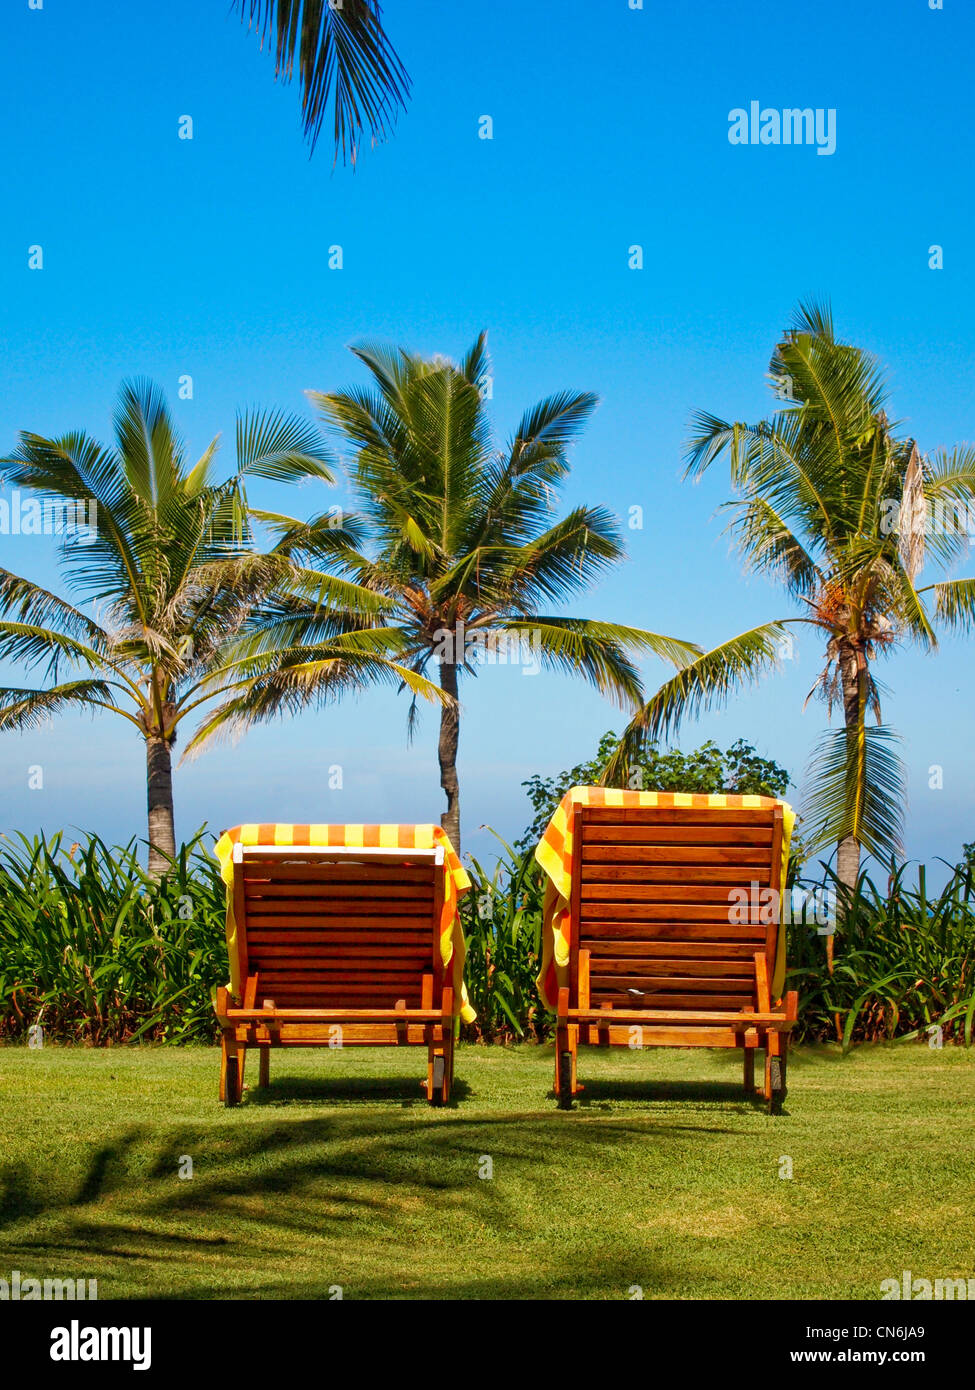 Deck chairs on green grass Bali Indonesia Stock Photo